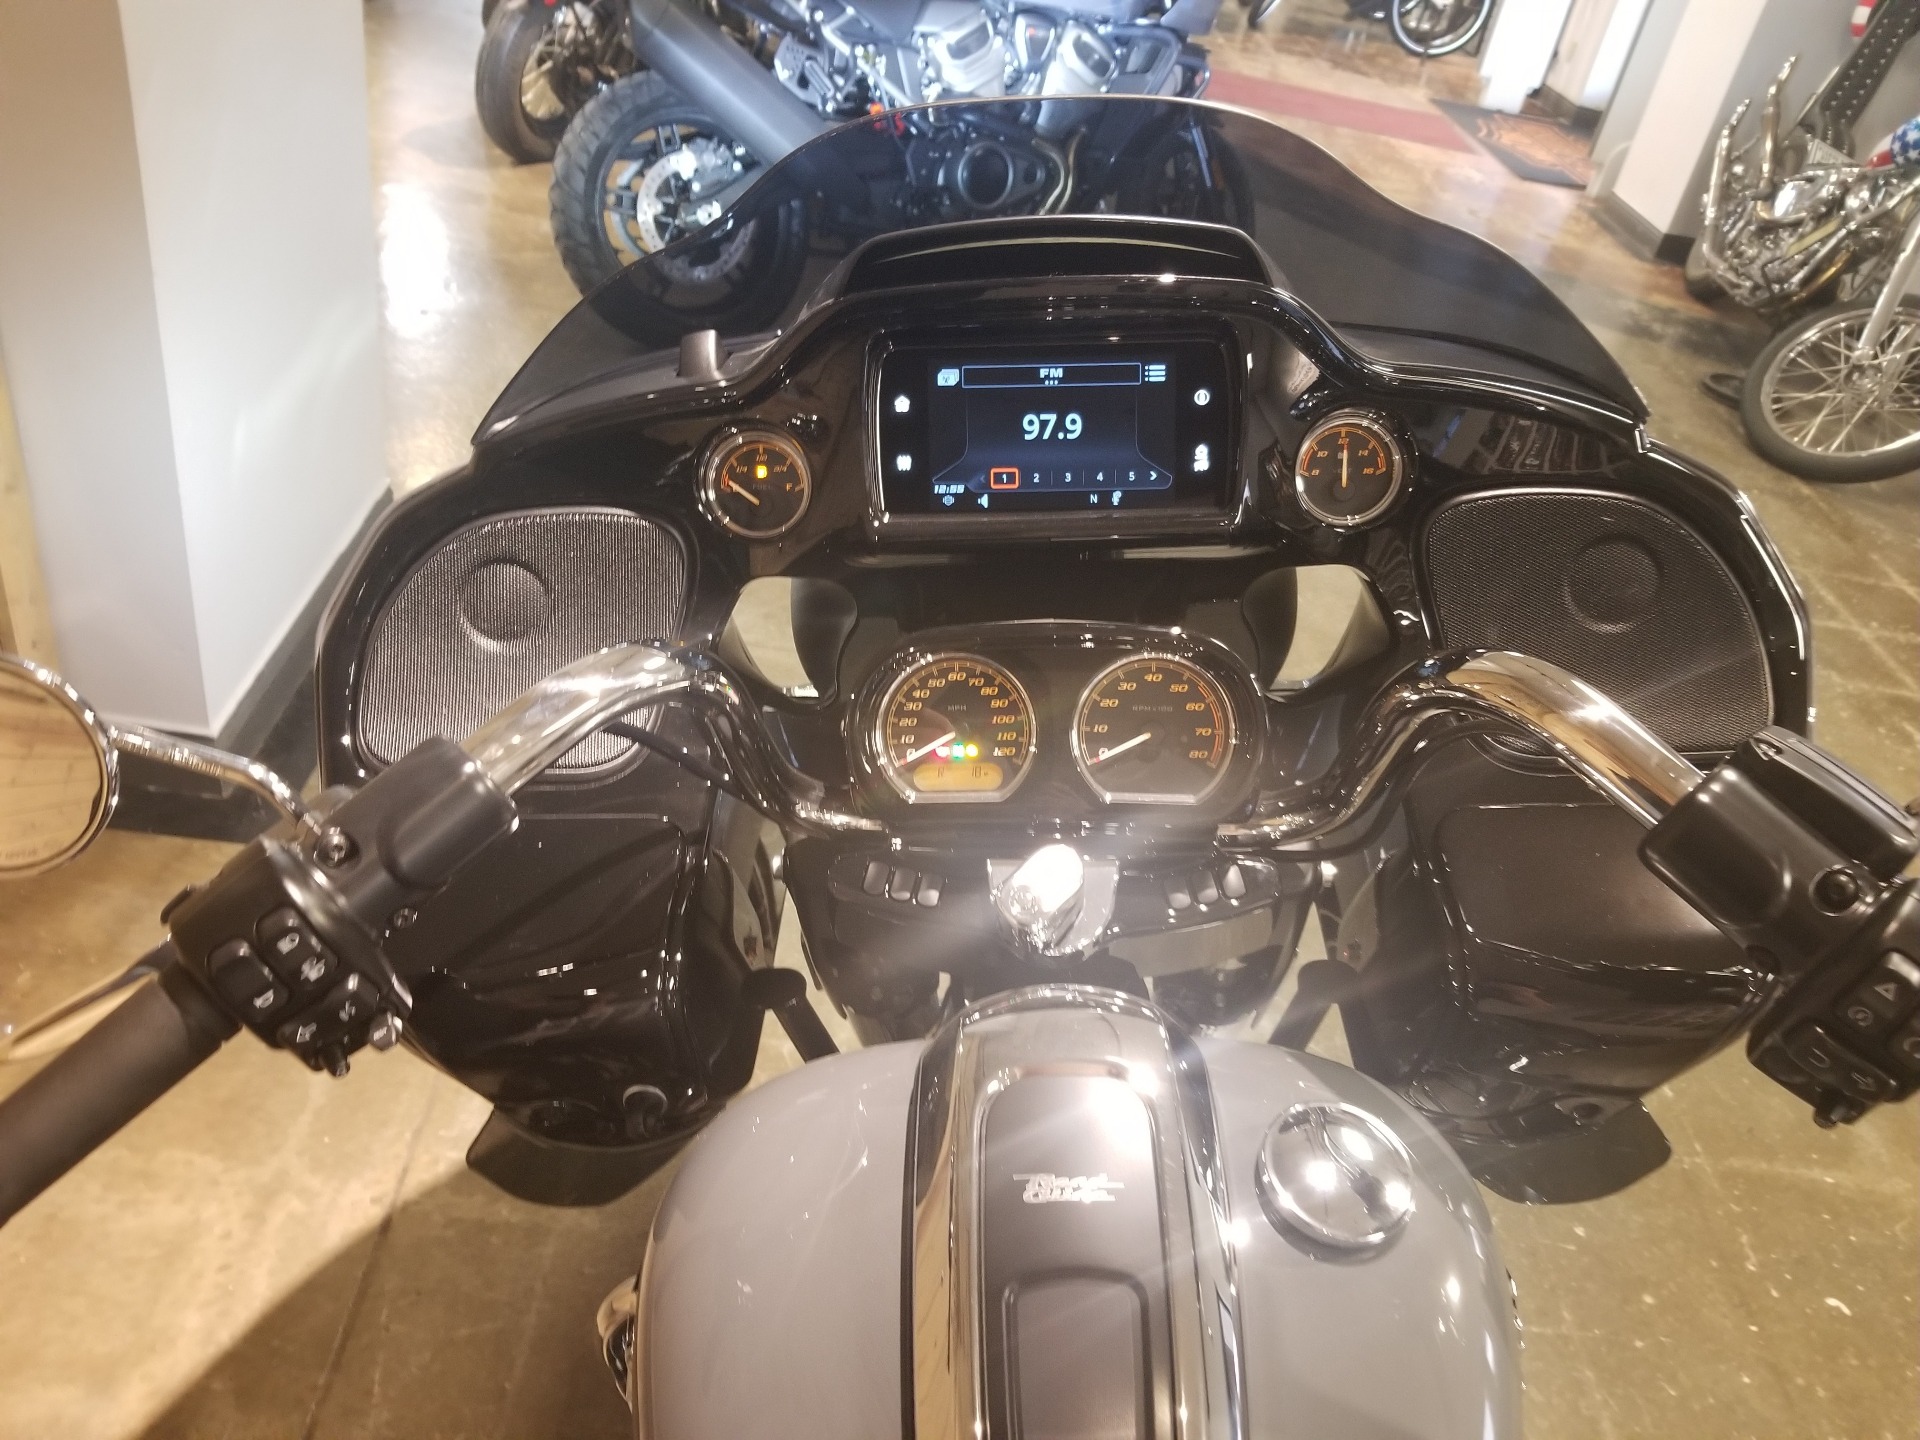 2022 Harley-Davidson Road Glide® Special in Mentor, Ohio - Photo 6